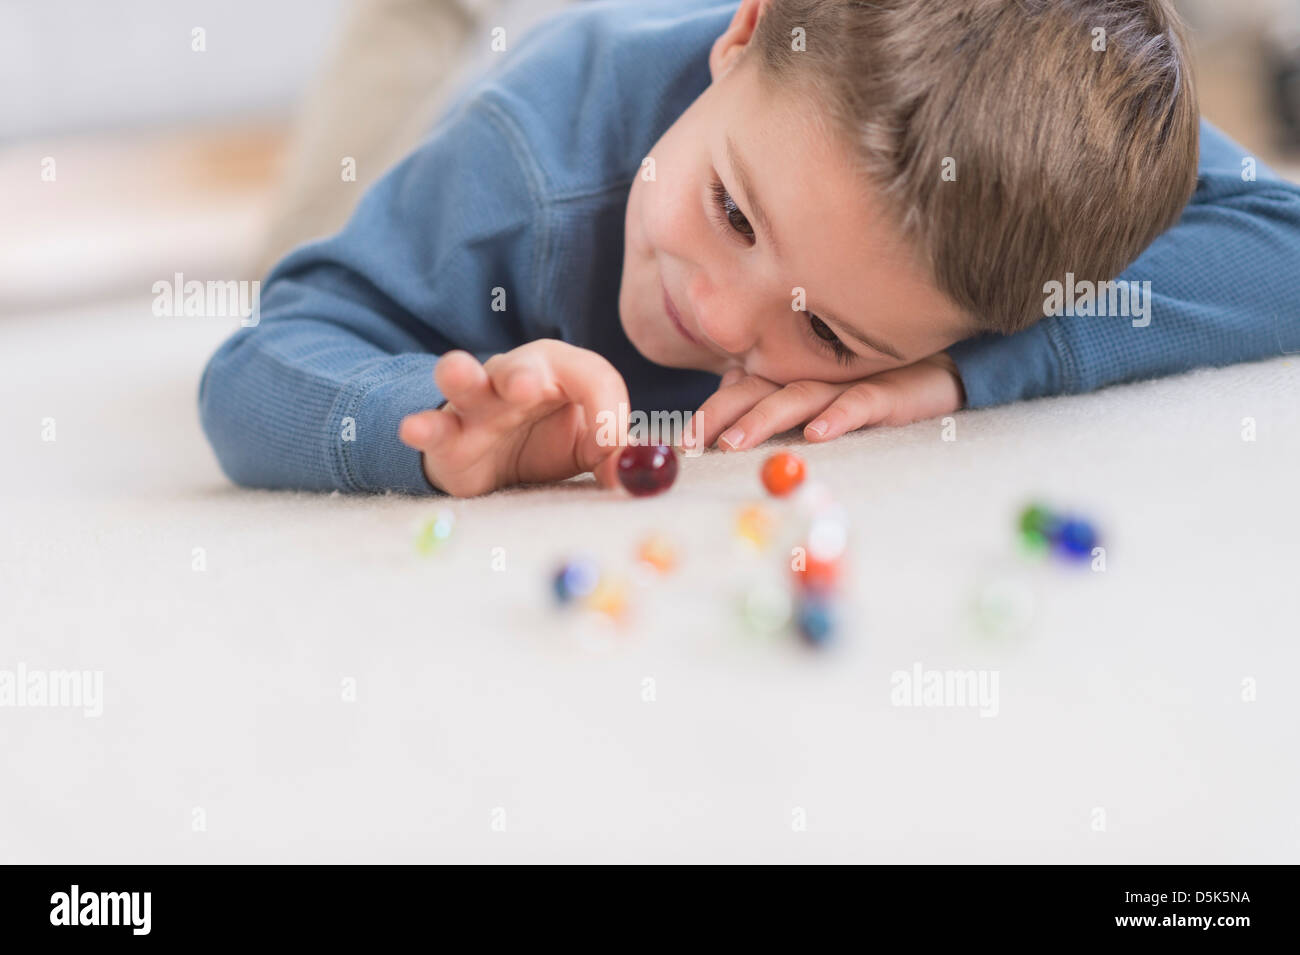 Boy (4-5) playing with marbles Stock Photo